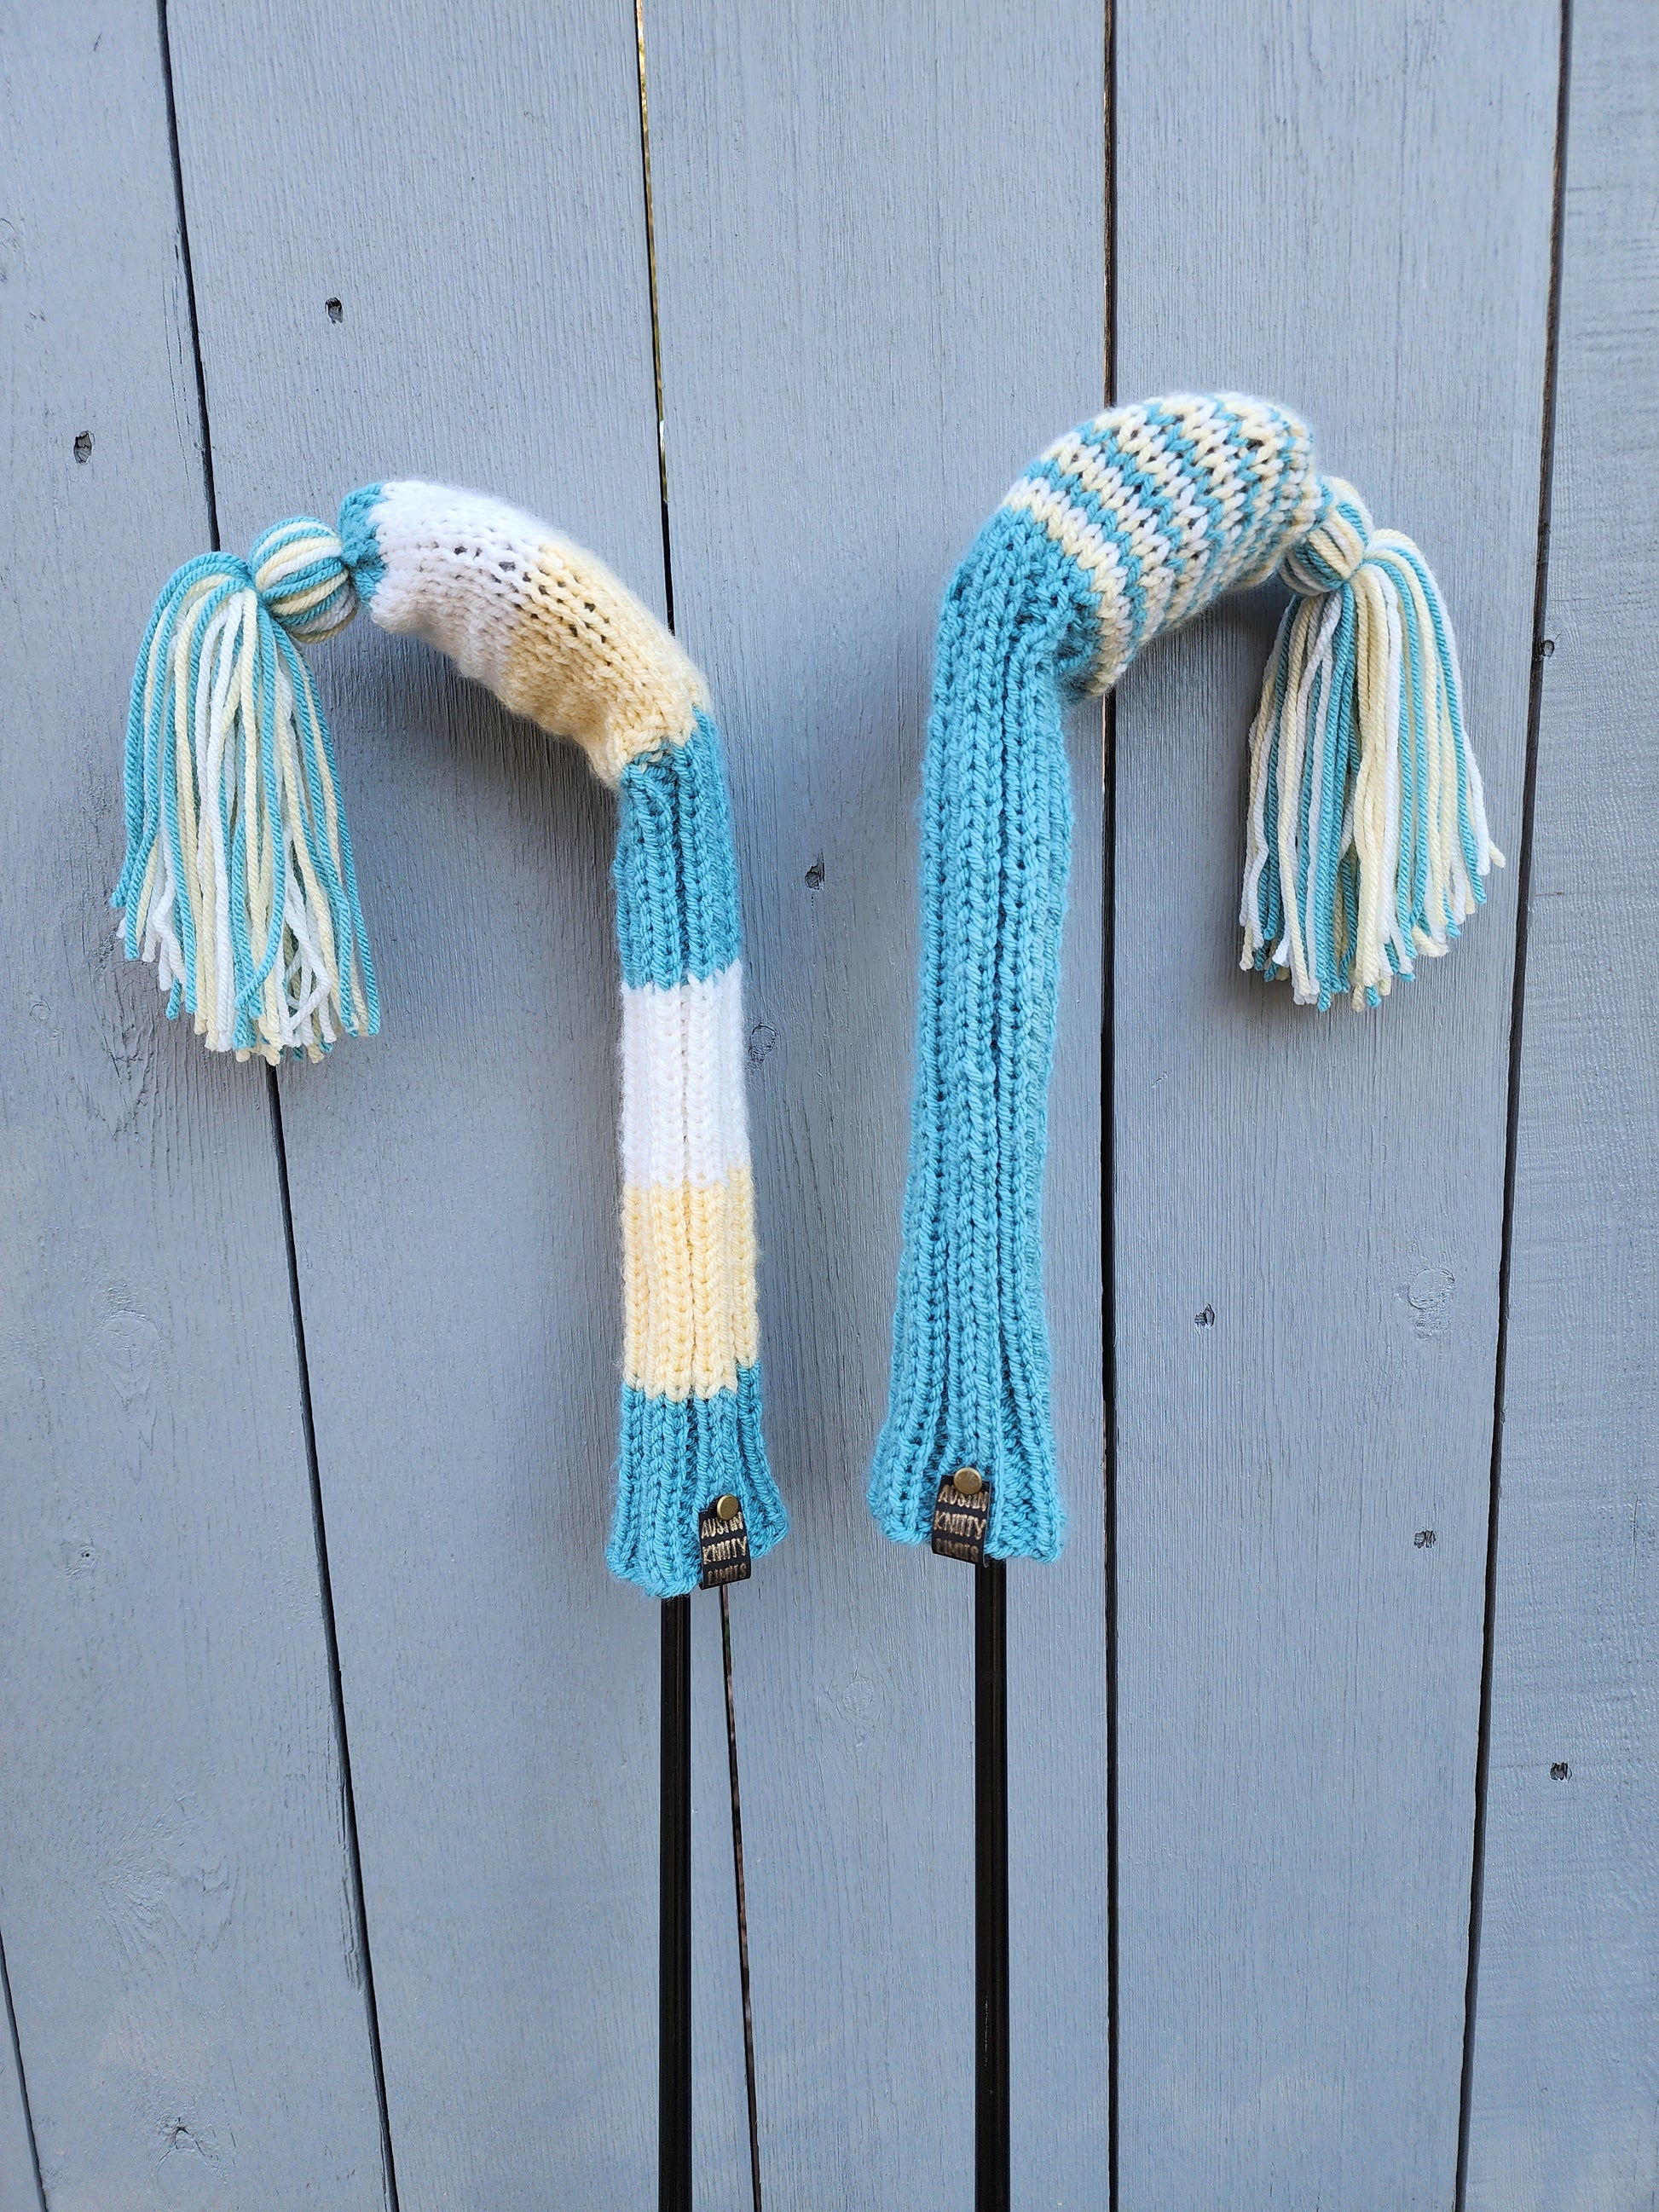 Two Golf Club Head Covers Retro-Vintage Blue, Yellow & White with Tassels for Fairway Woods - Austinknittylimits